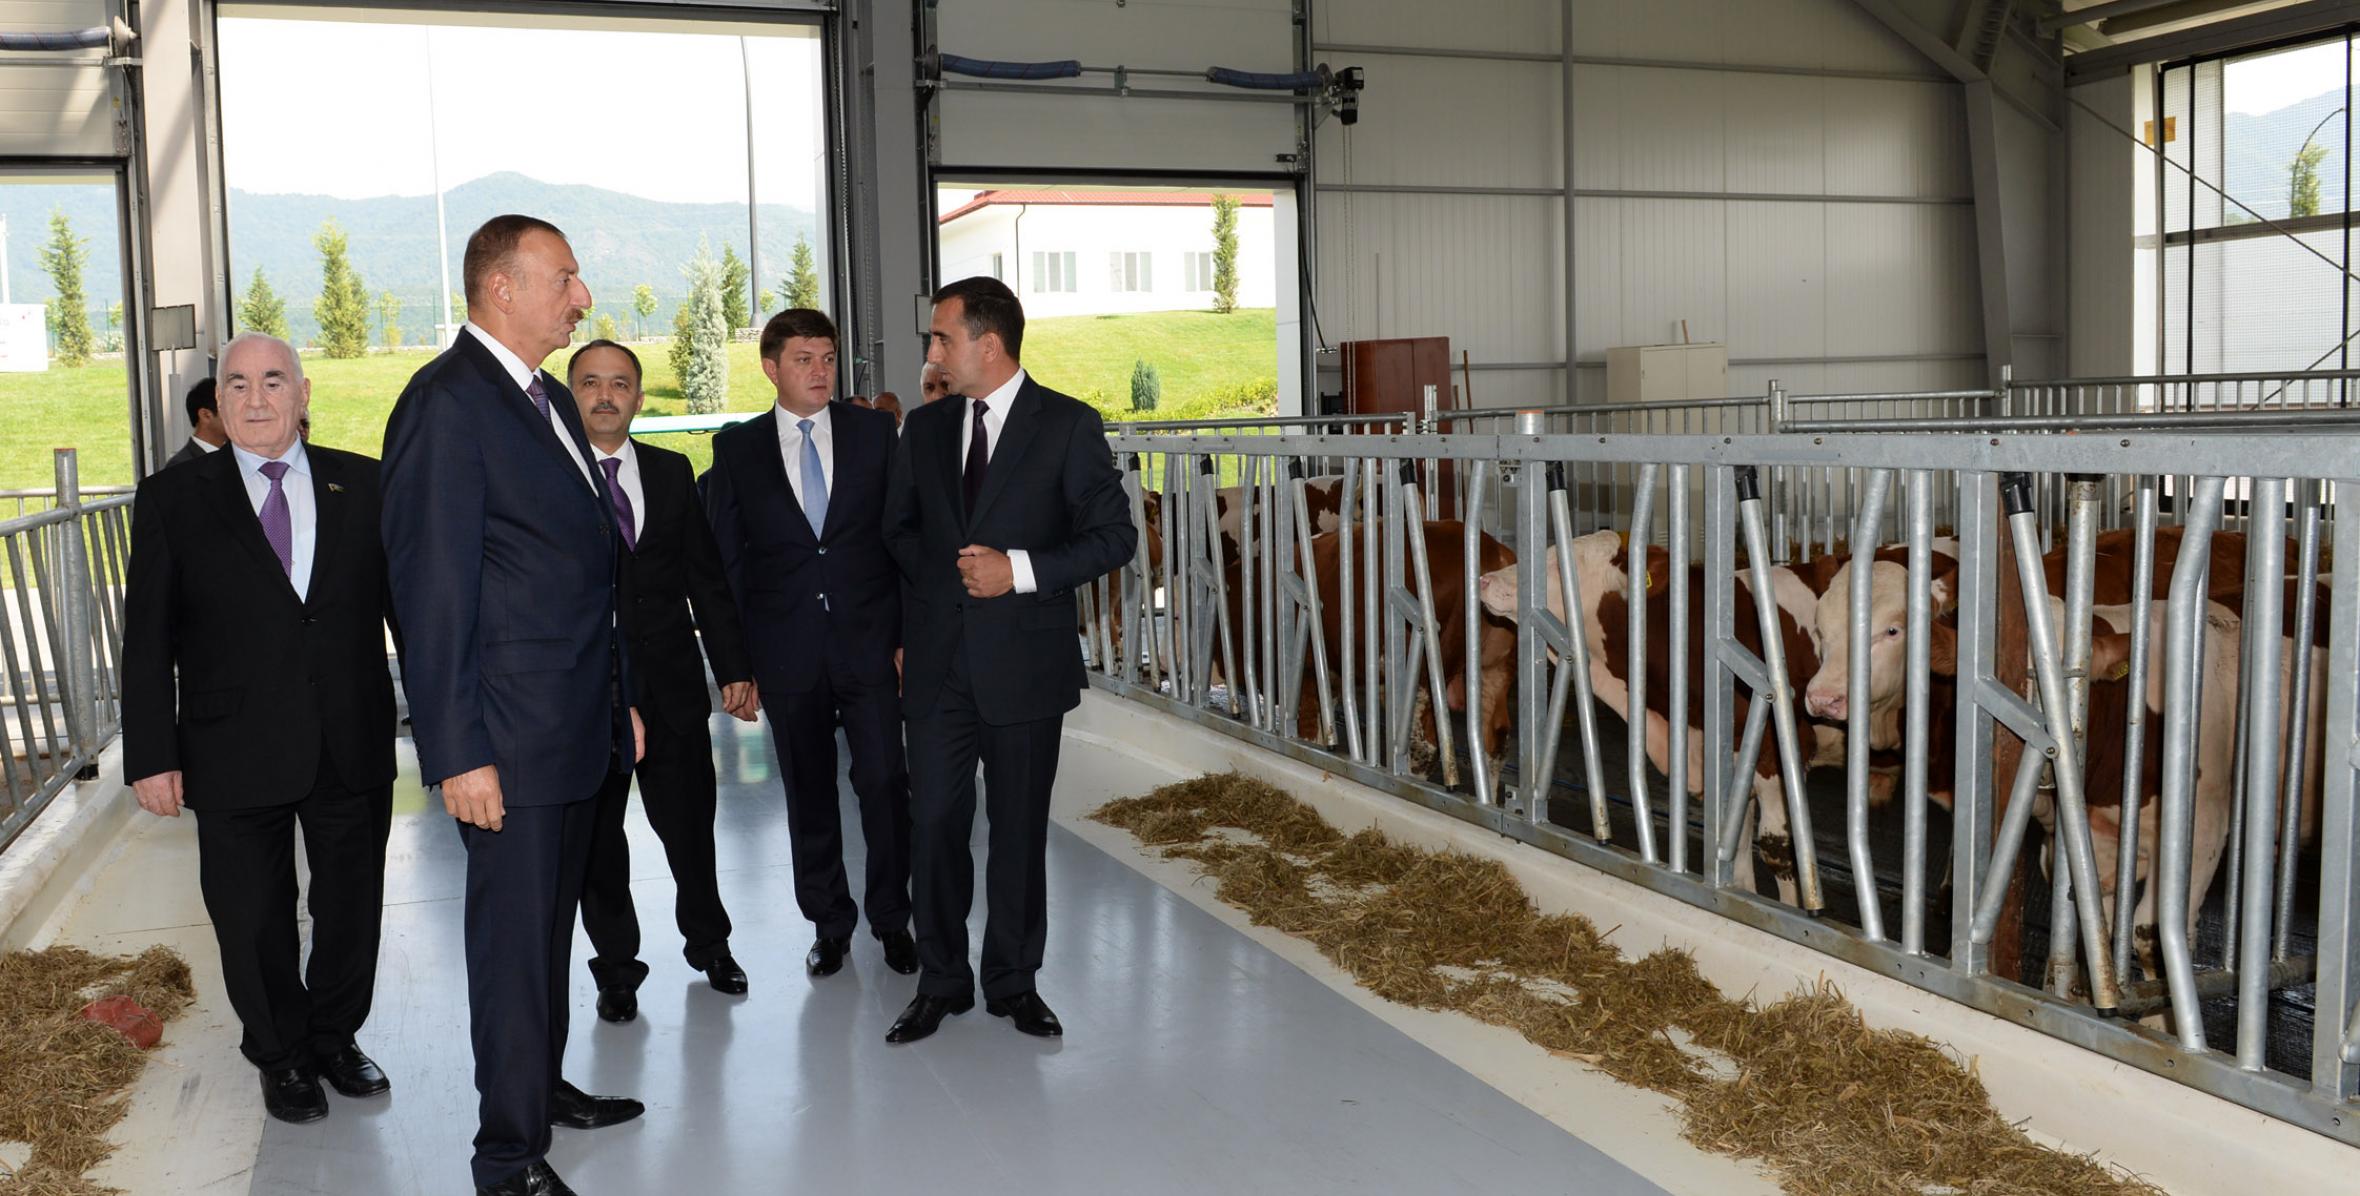 Ilham Aliyev attended the opening of an agro-industrial complex of the “Agro Complex Gabala” LLC